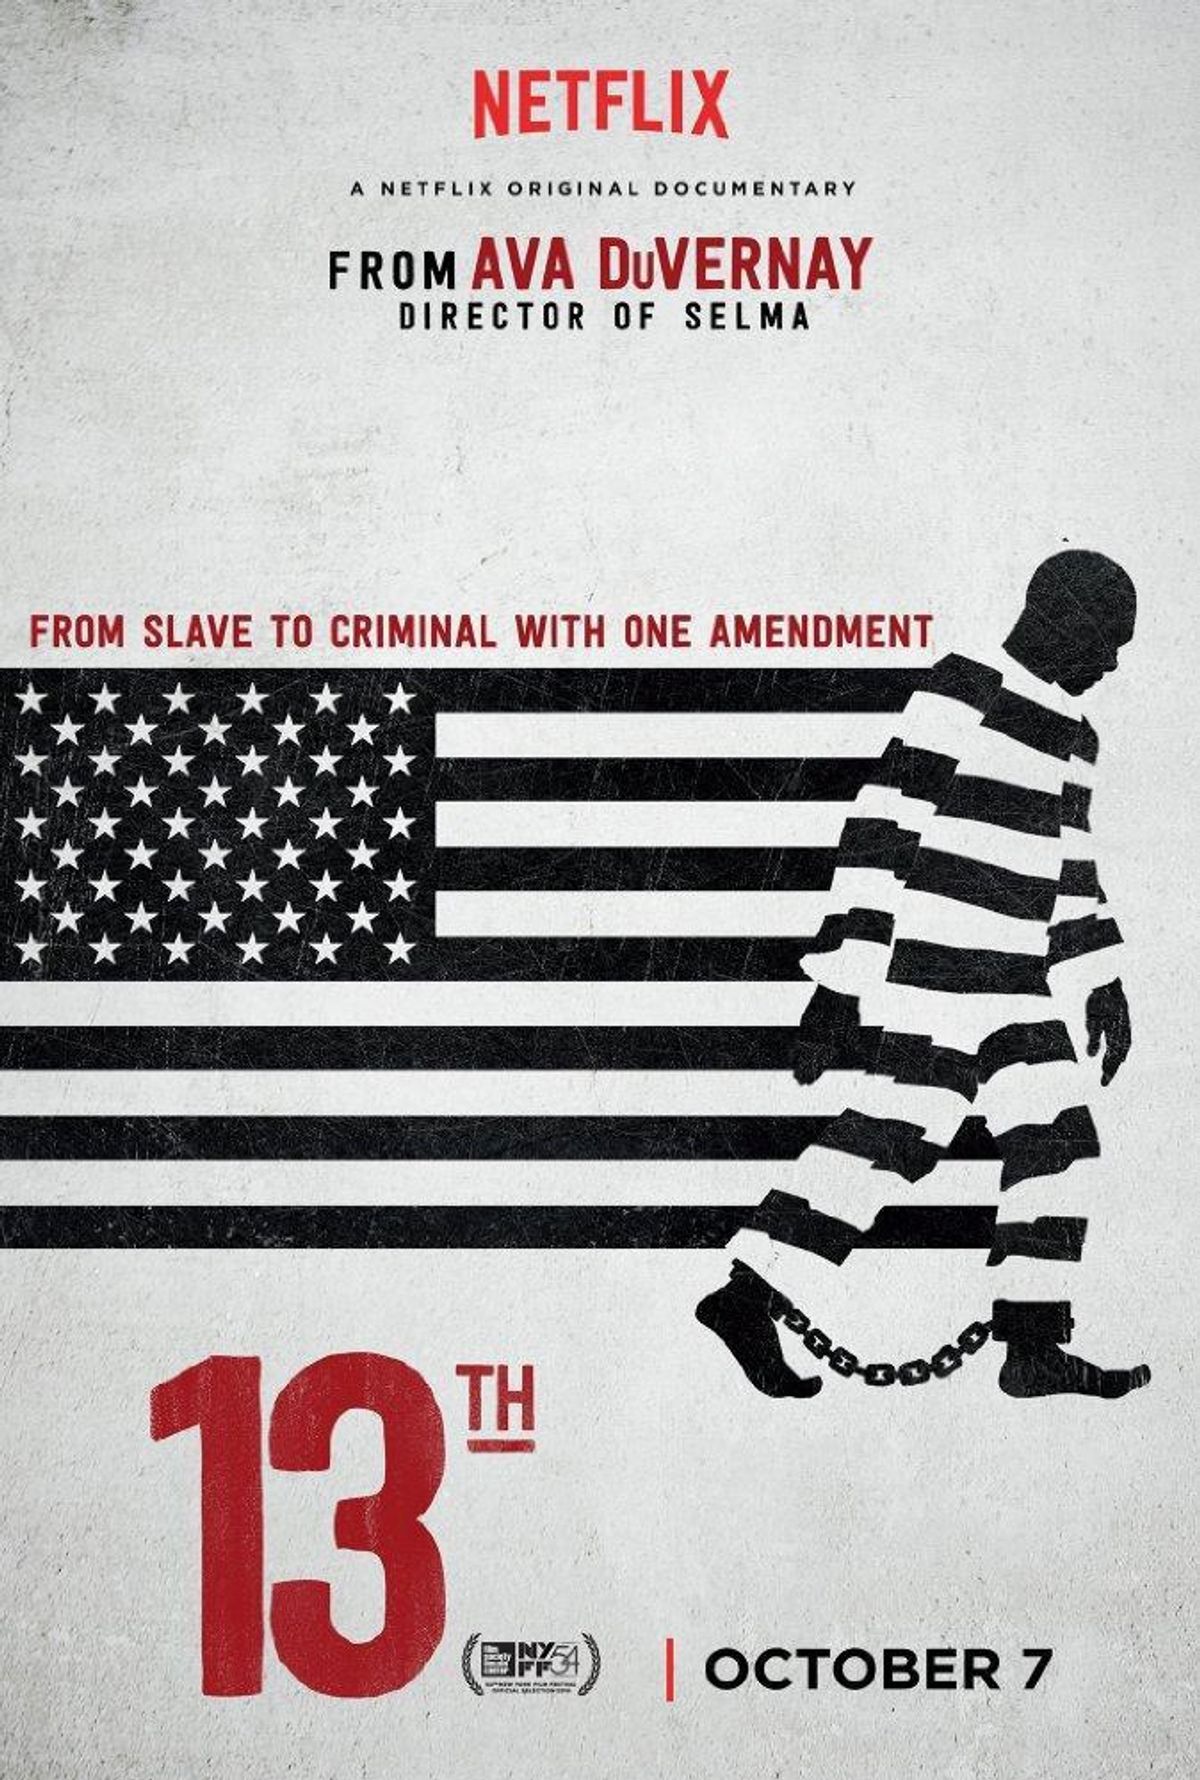 Why You Should Watch Netflix's "The 13th"